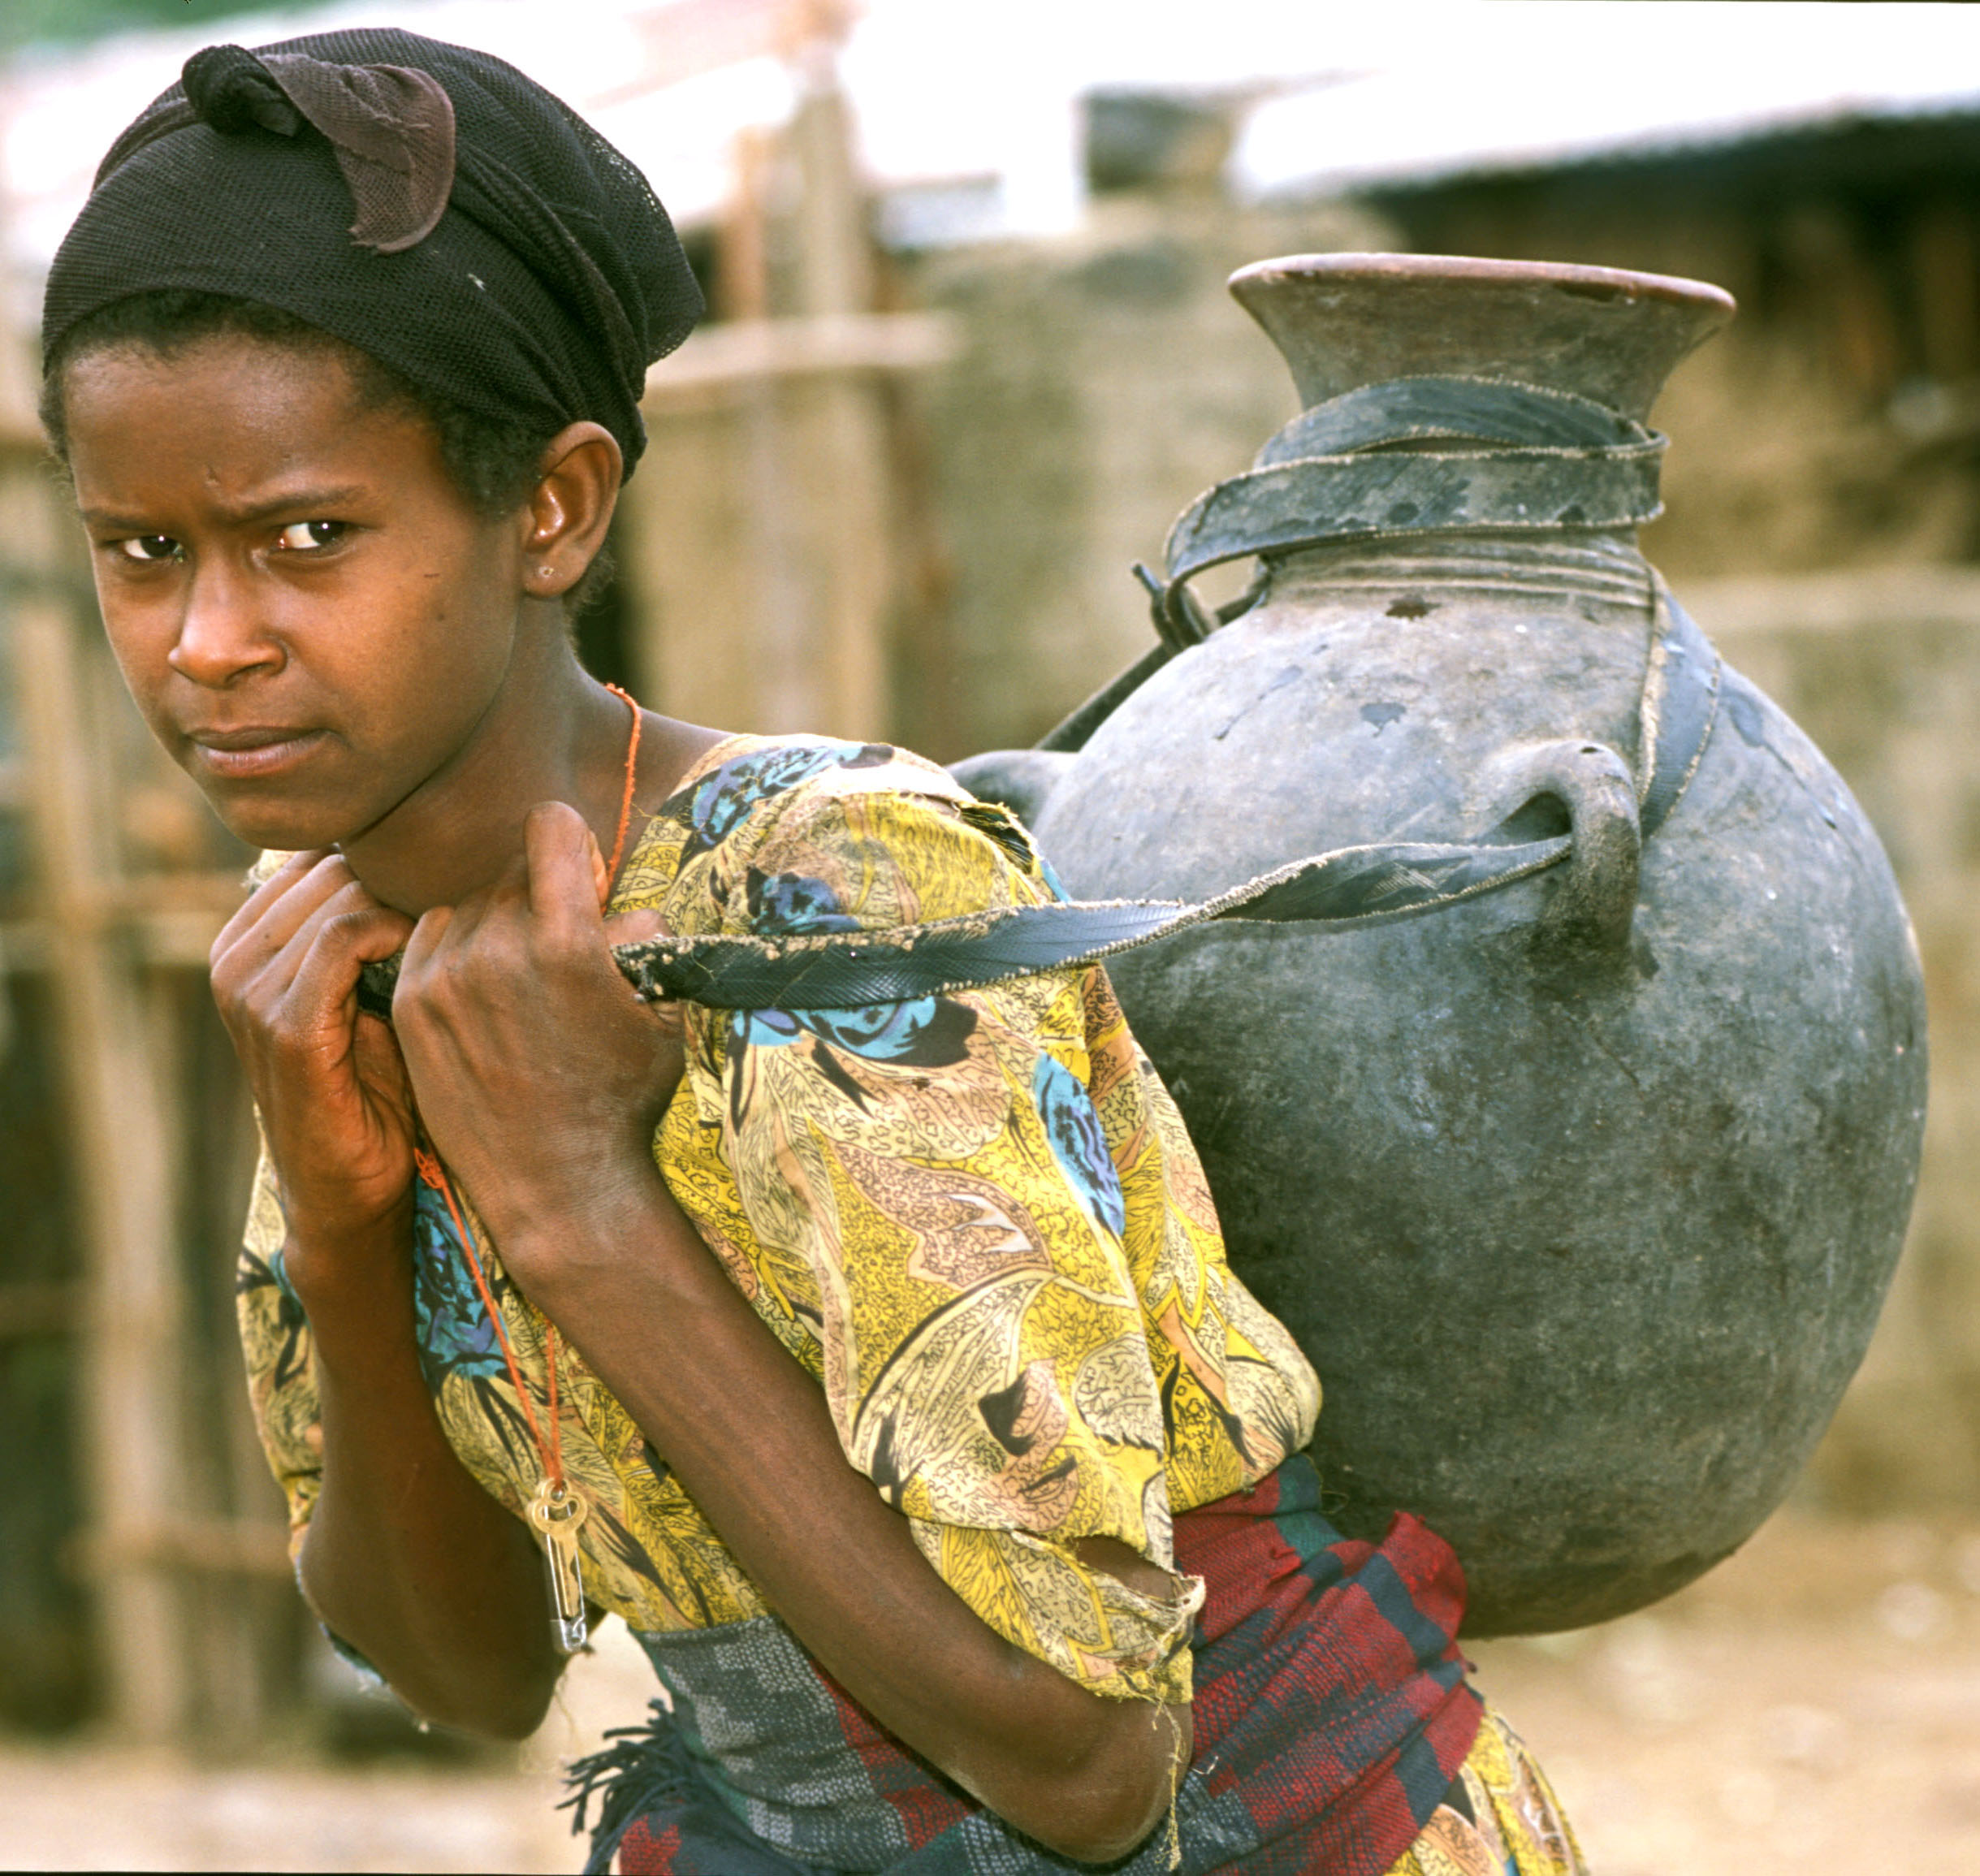 Girl in Ethiopia carrying water. Copyright: WHO/P. Virot.